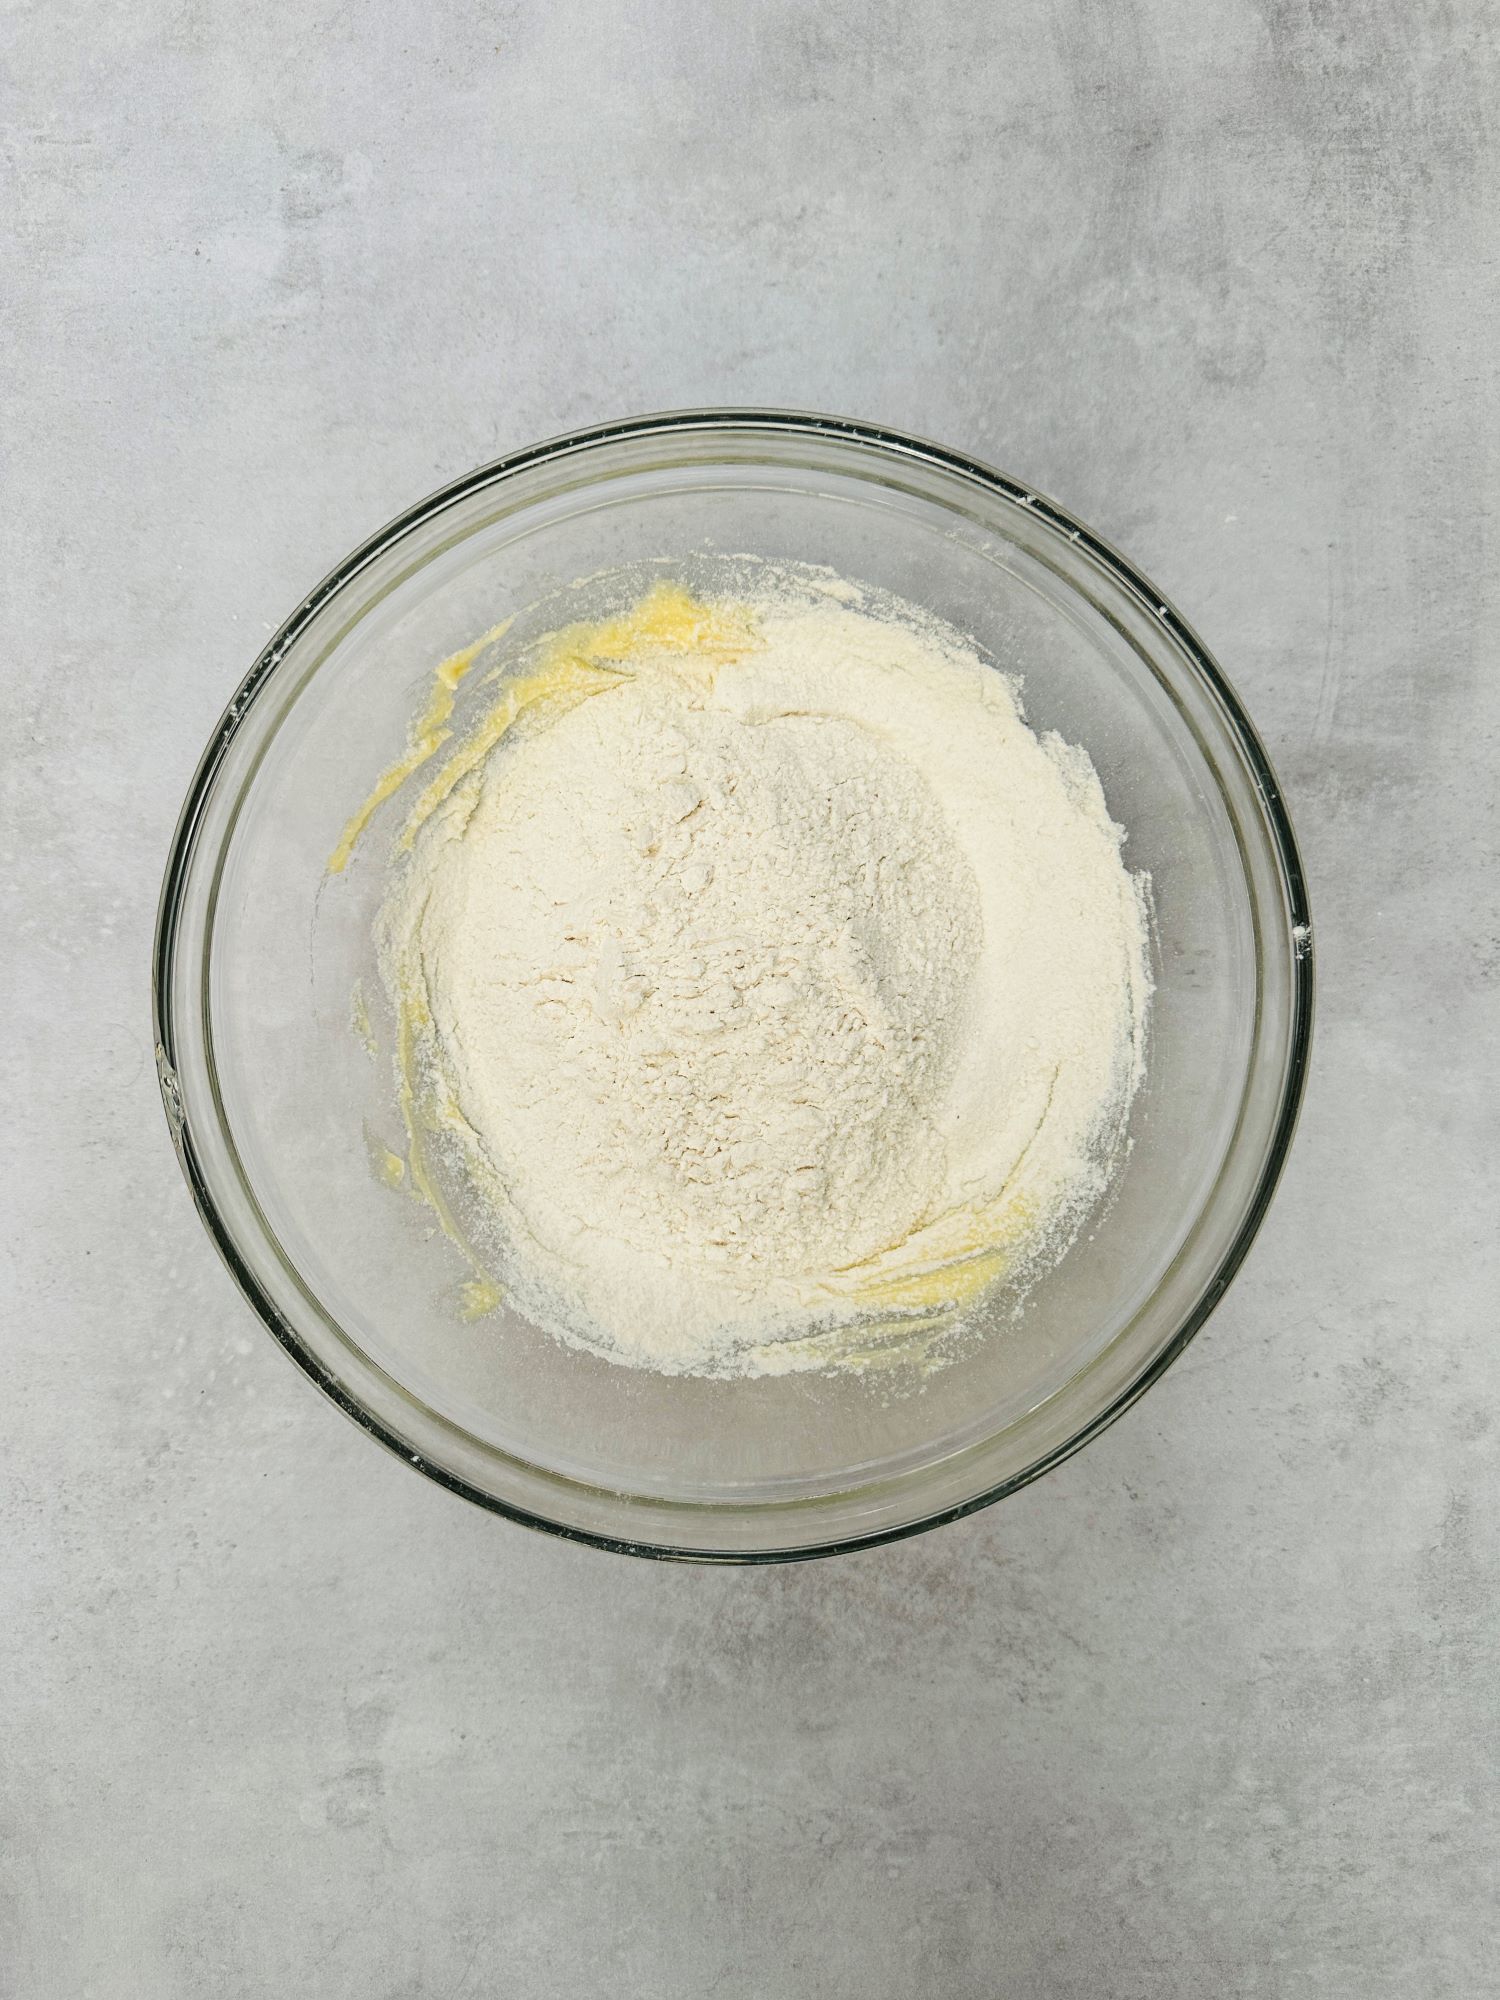 flour added to butter and sugar in a bowl to make shortbread